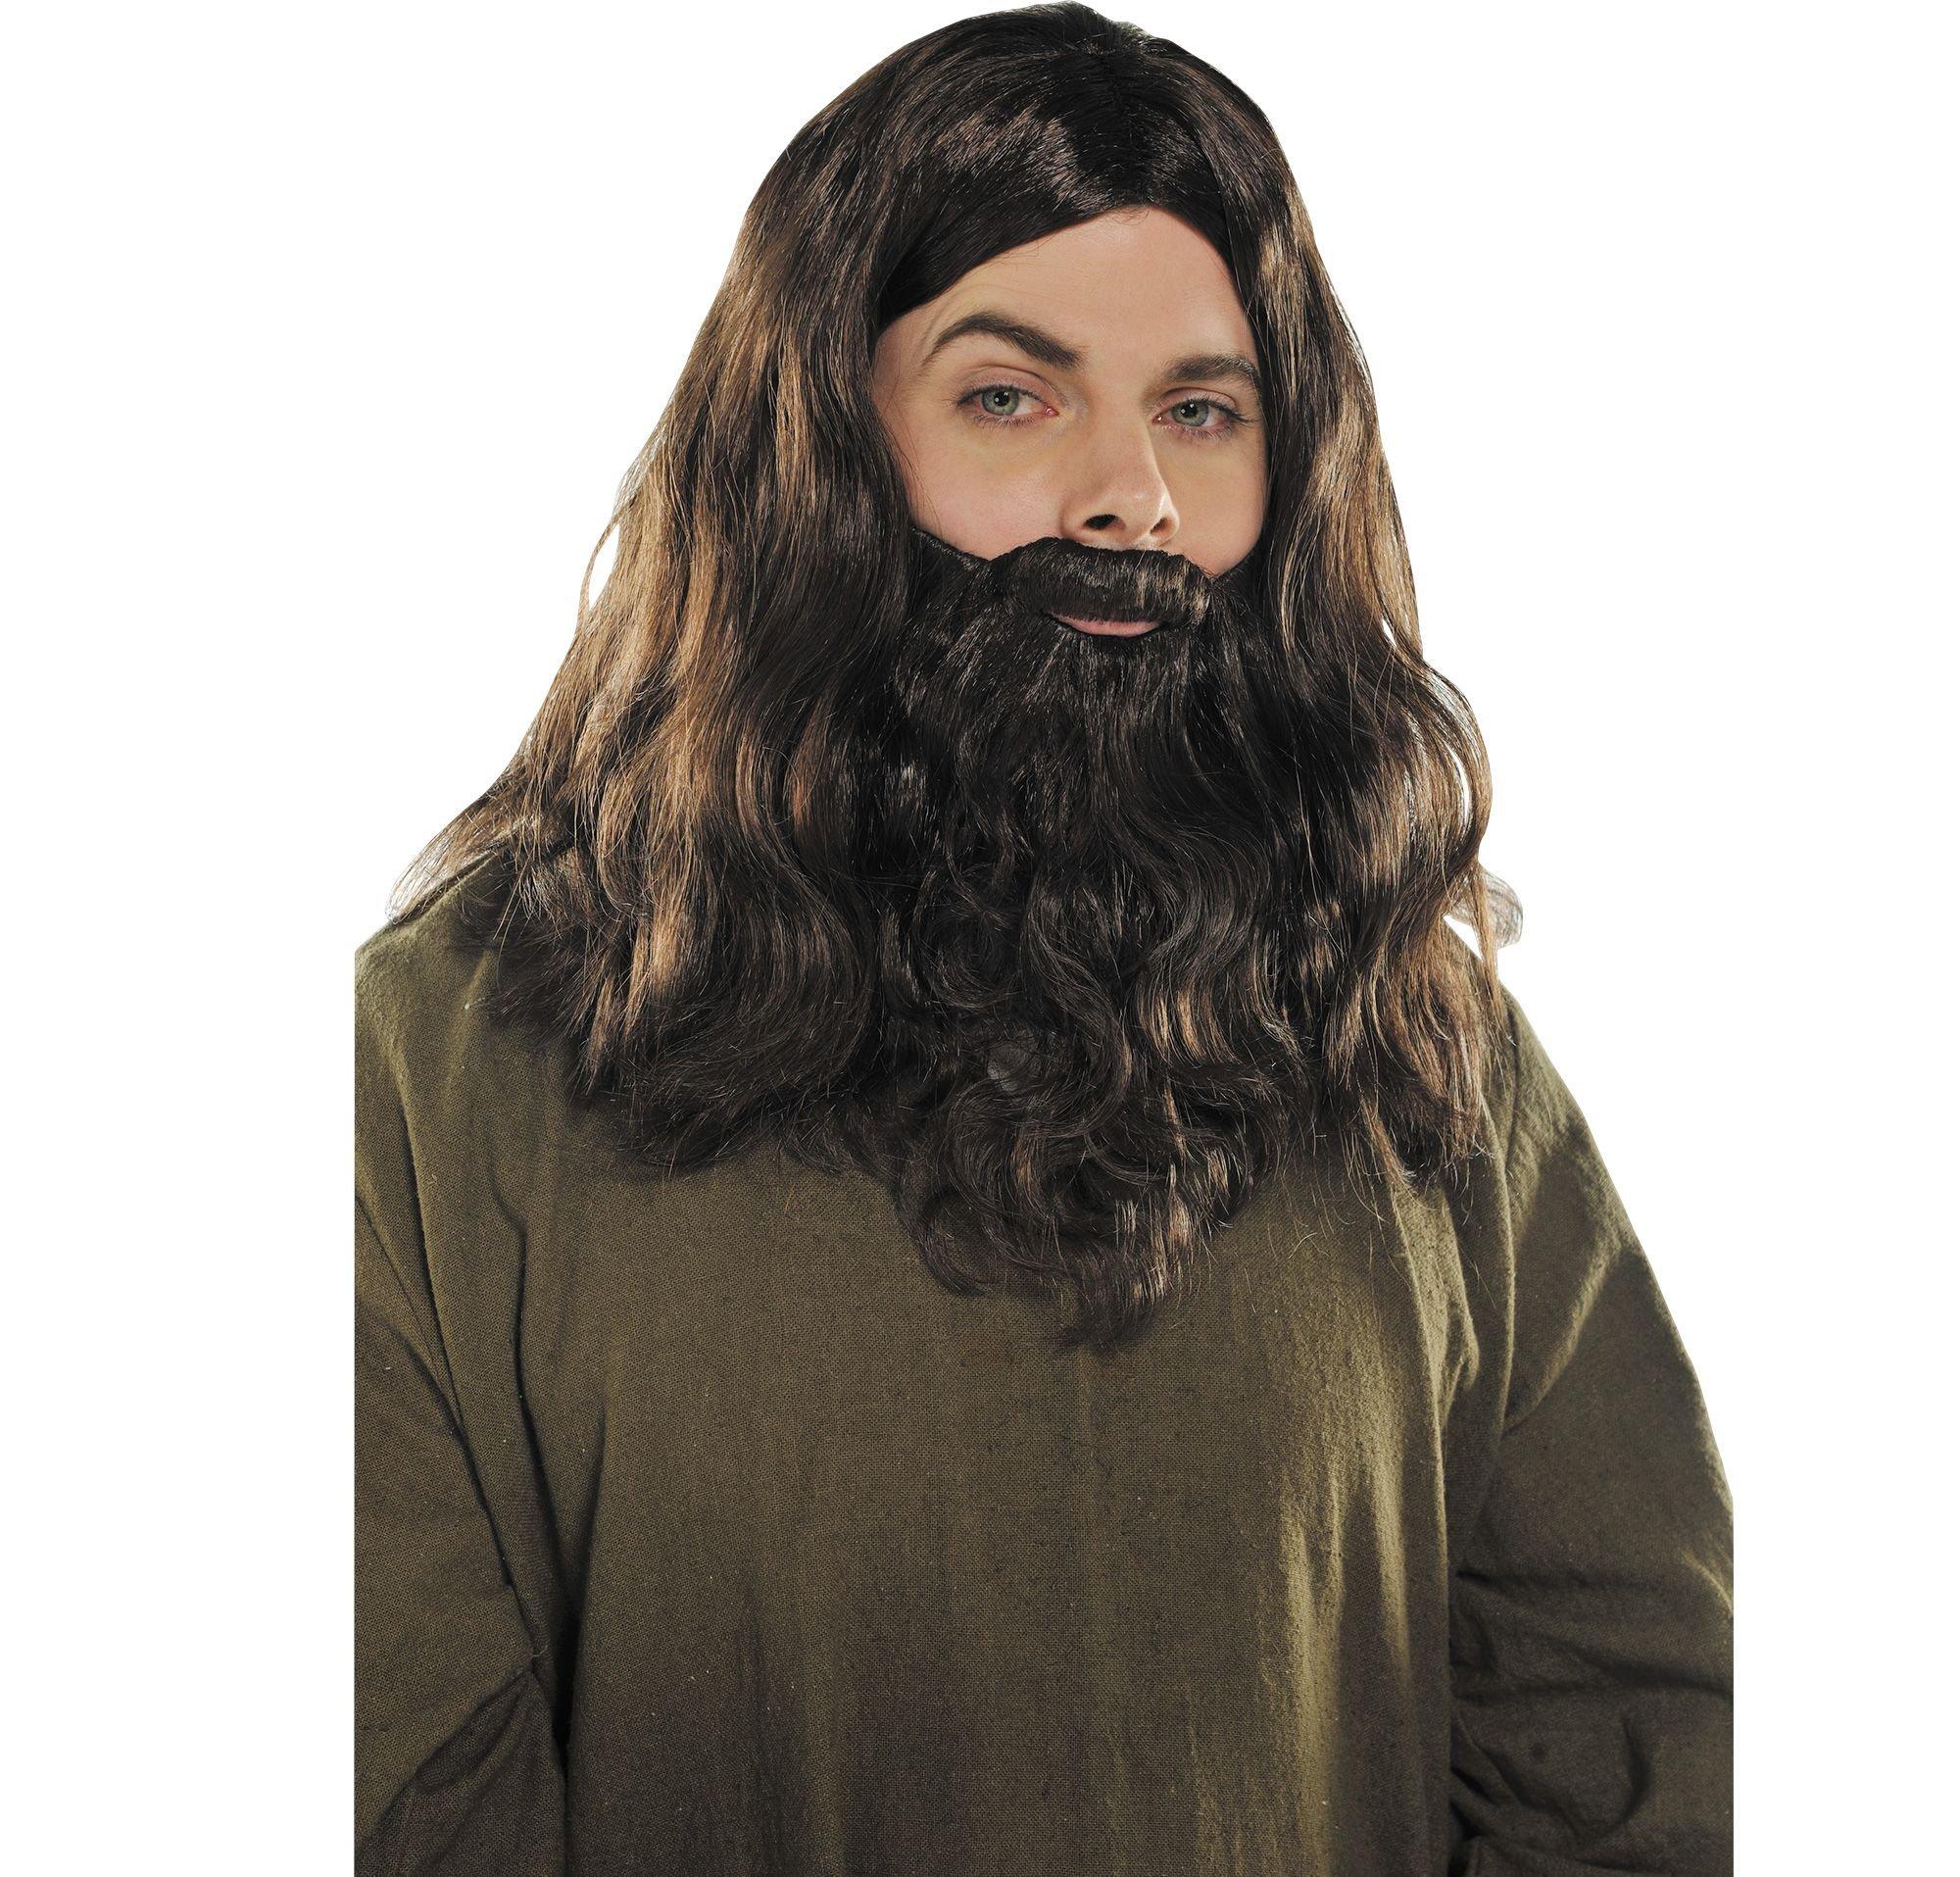 Hippie Costumes for Adults & Kids